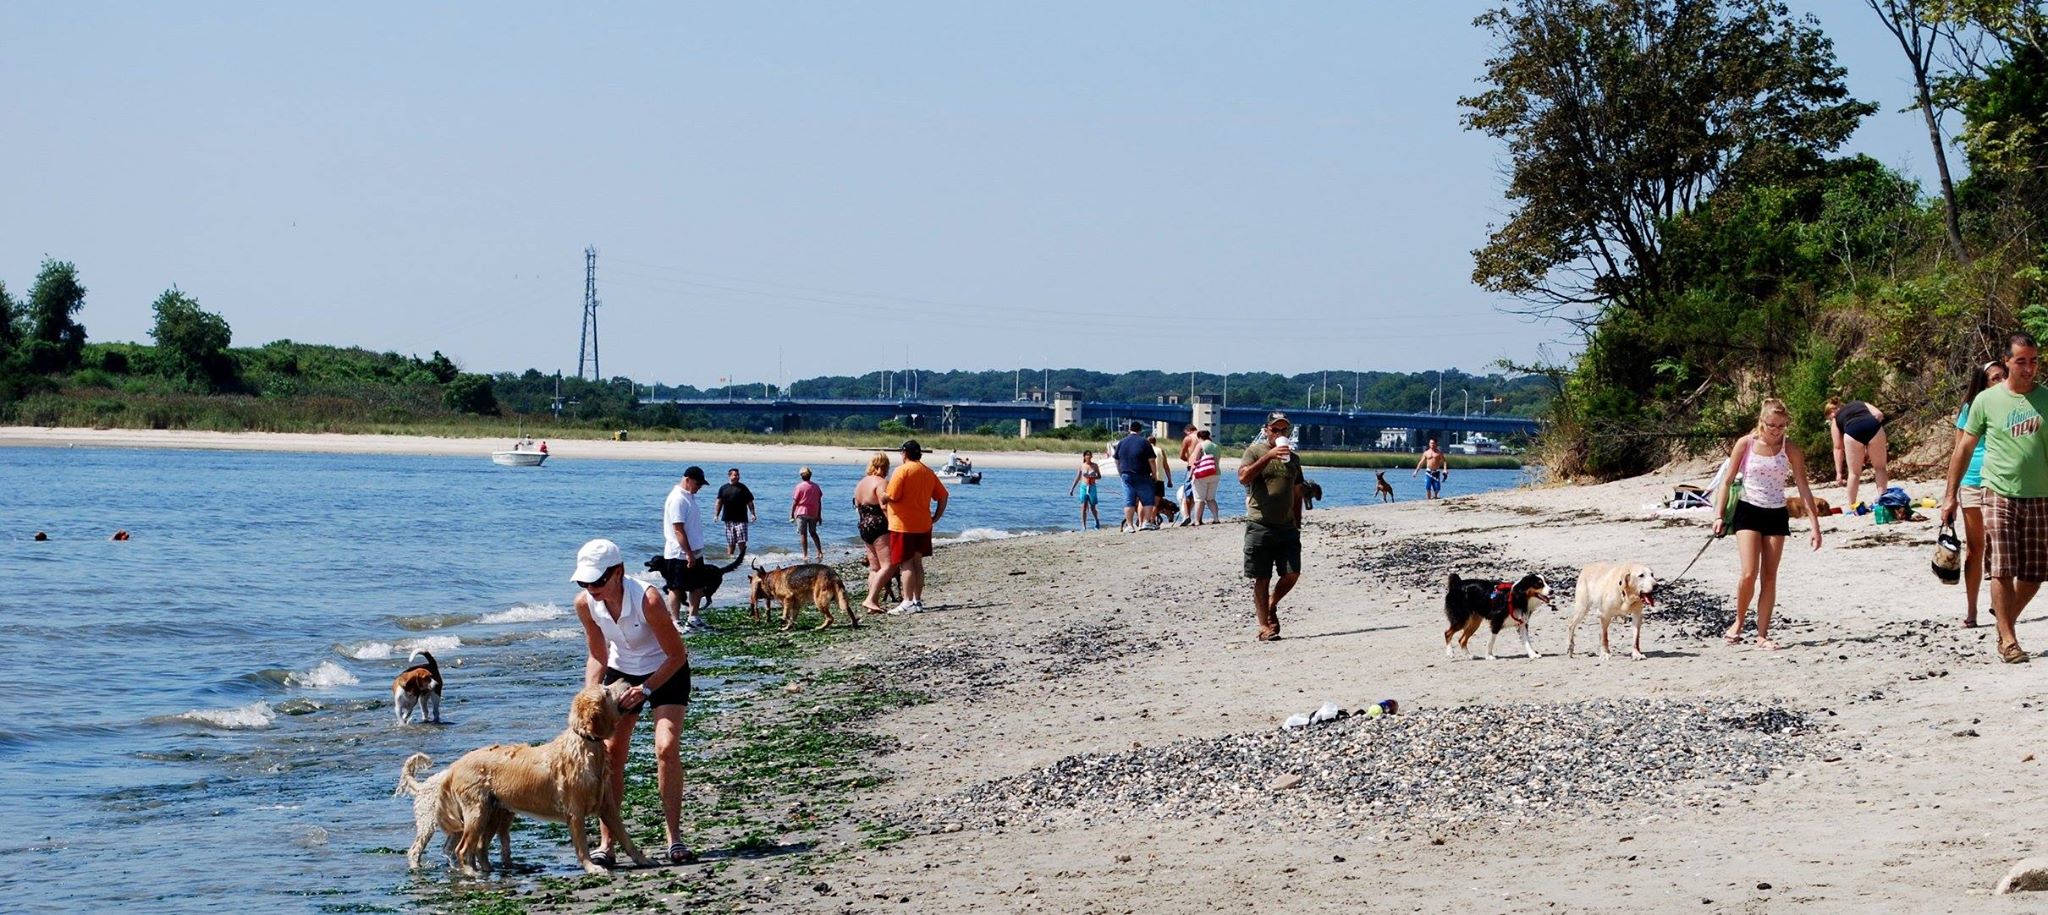 Dogs to be Restricted From 'Dog Beach' Near Manasquan ...